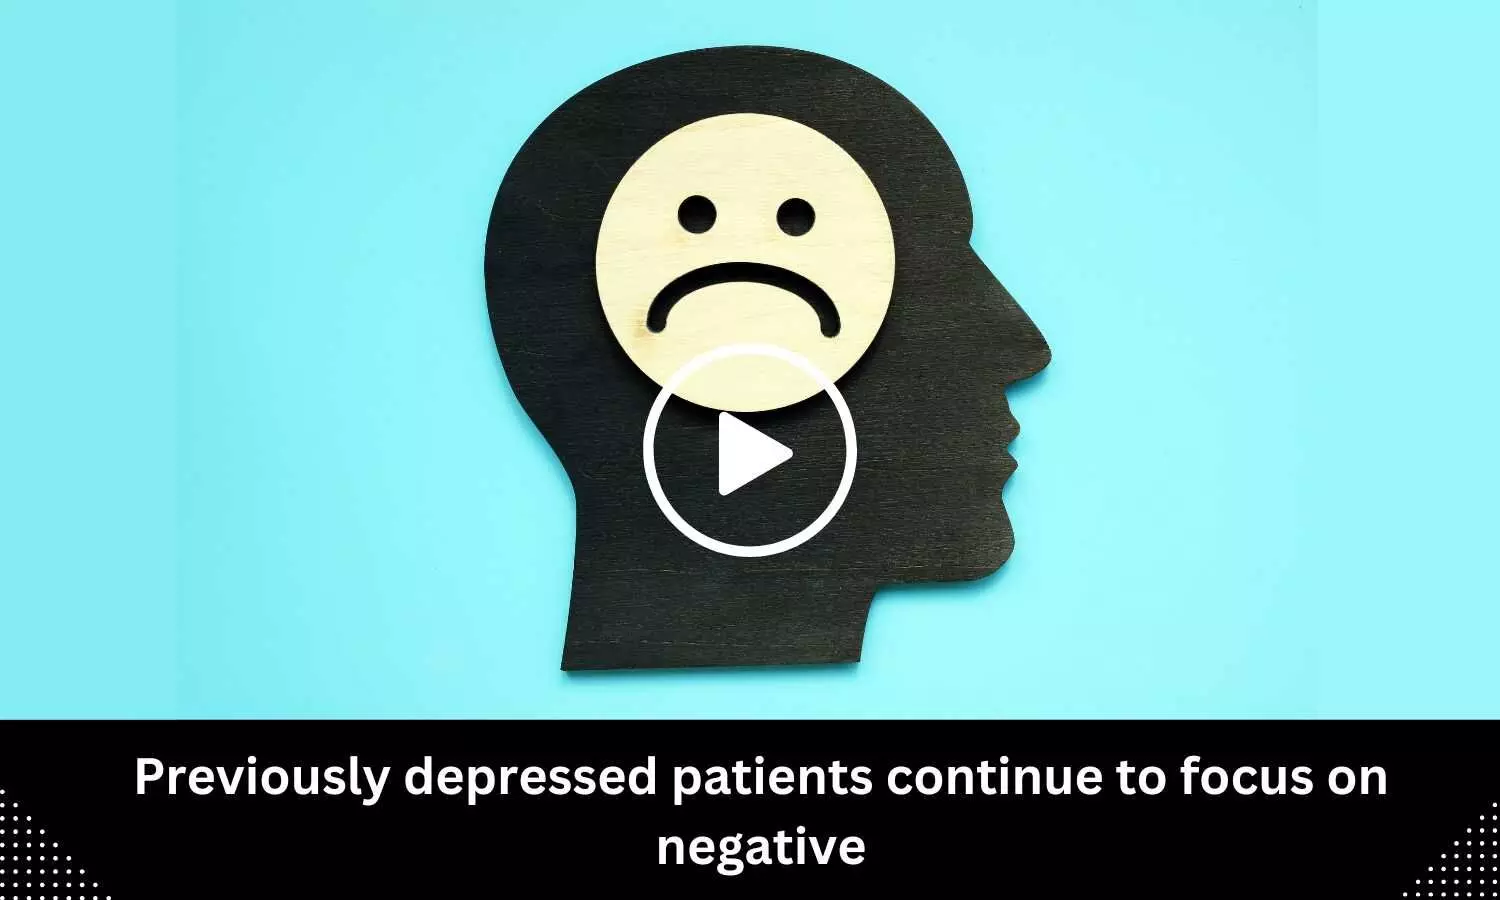 Previously depressed patients continue to focus on negative